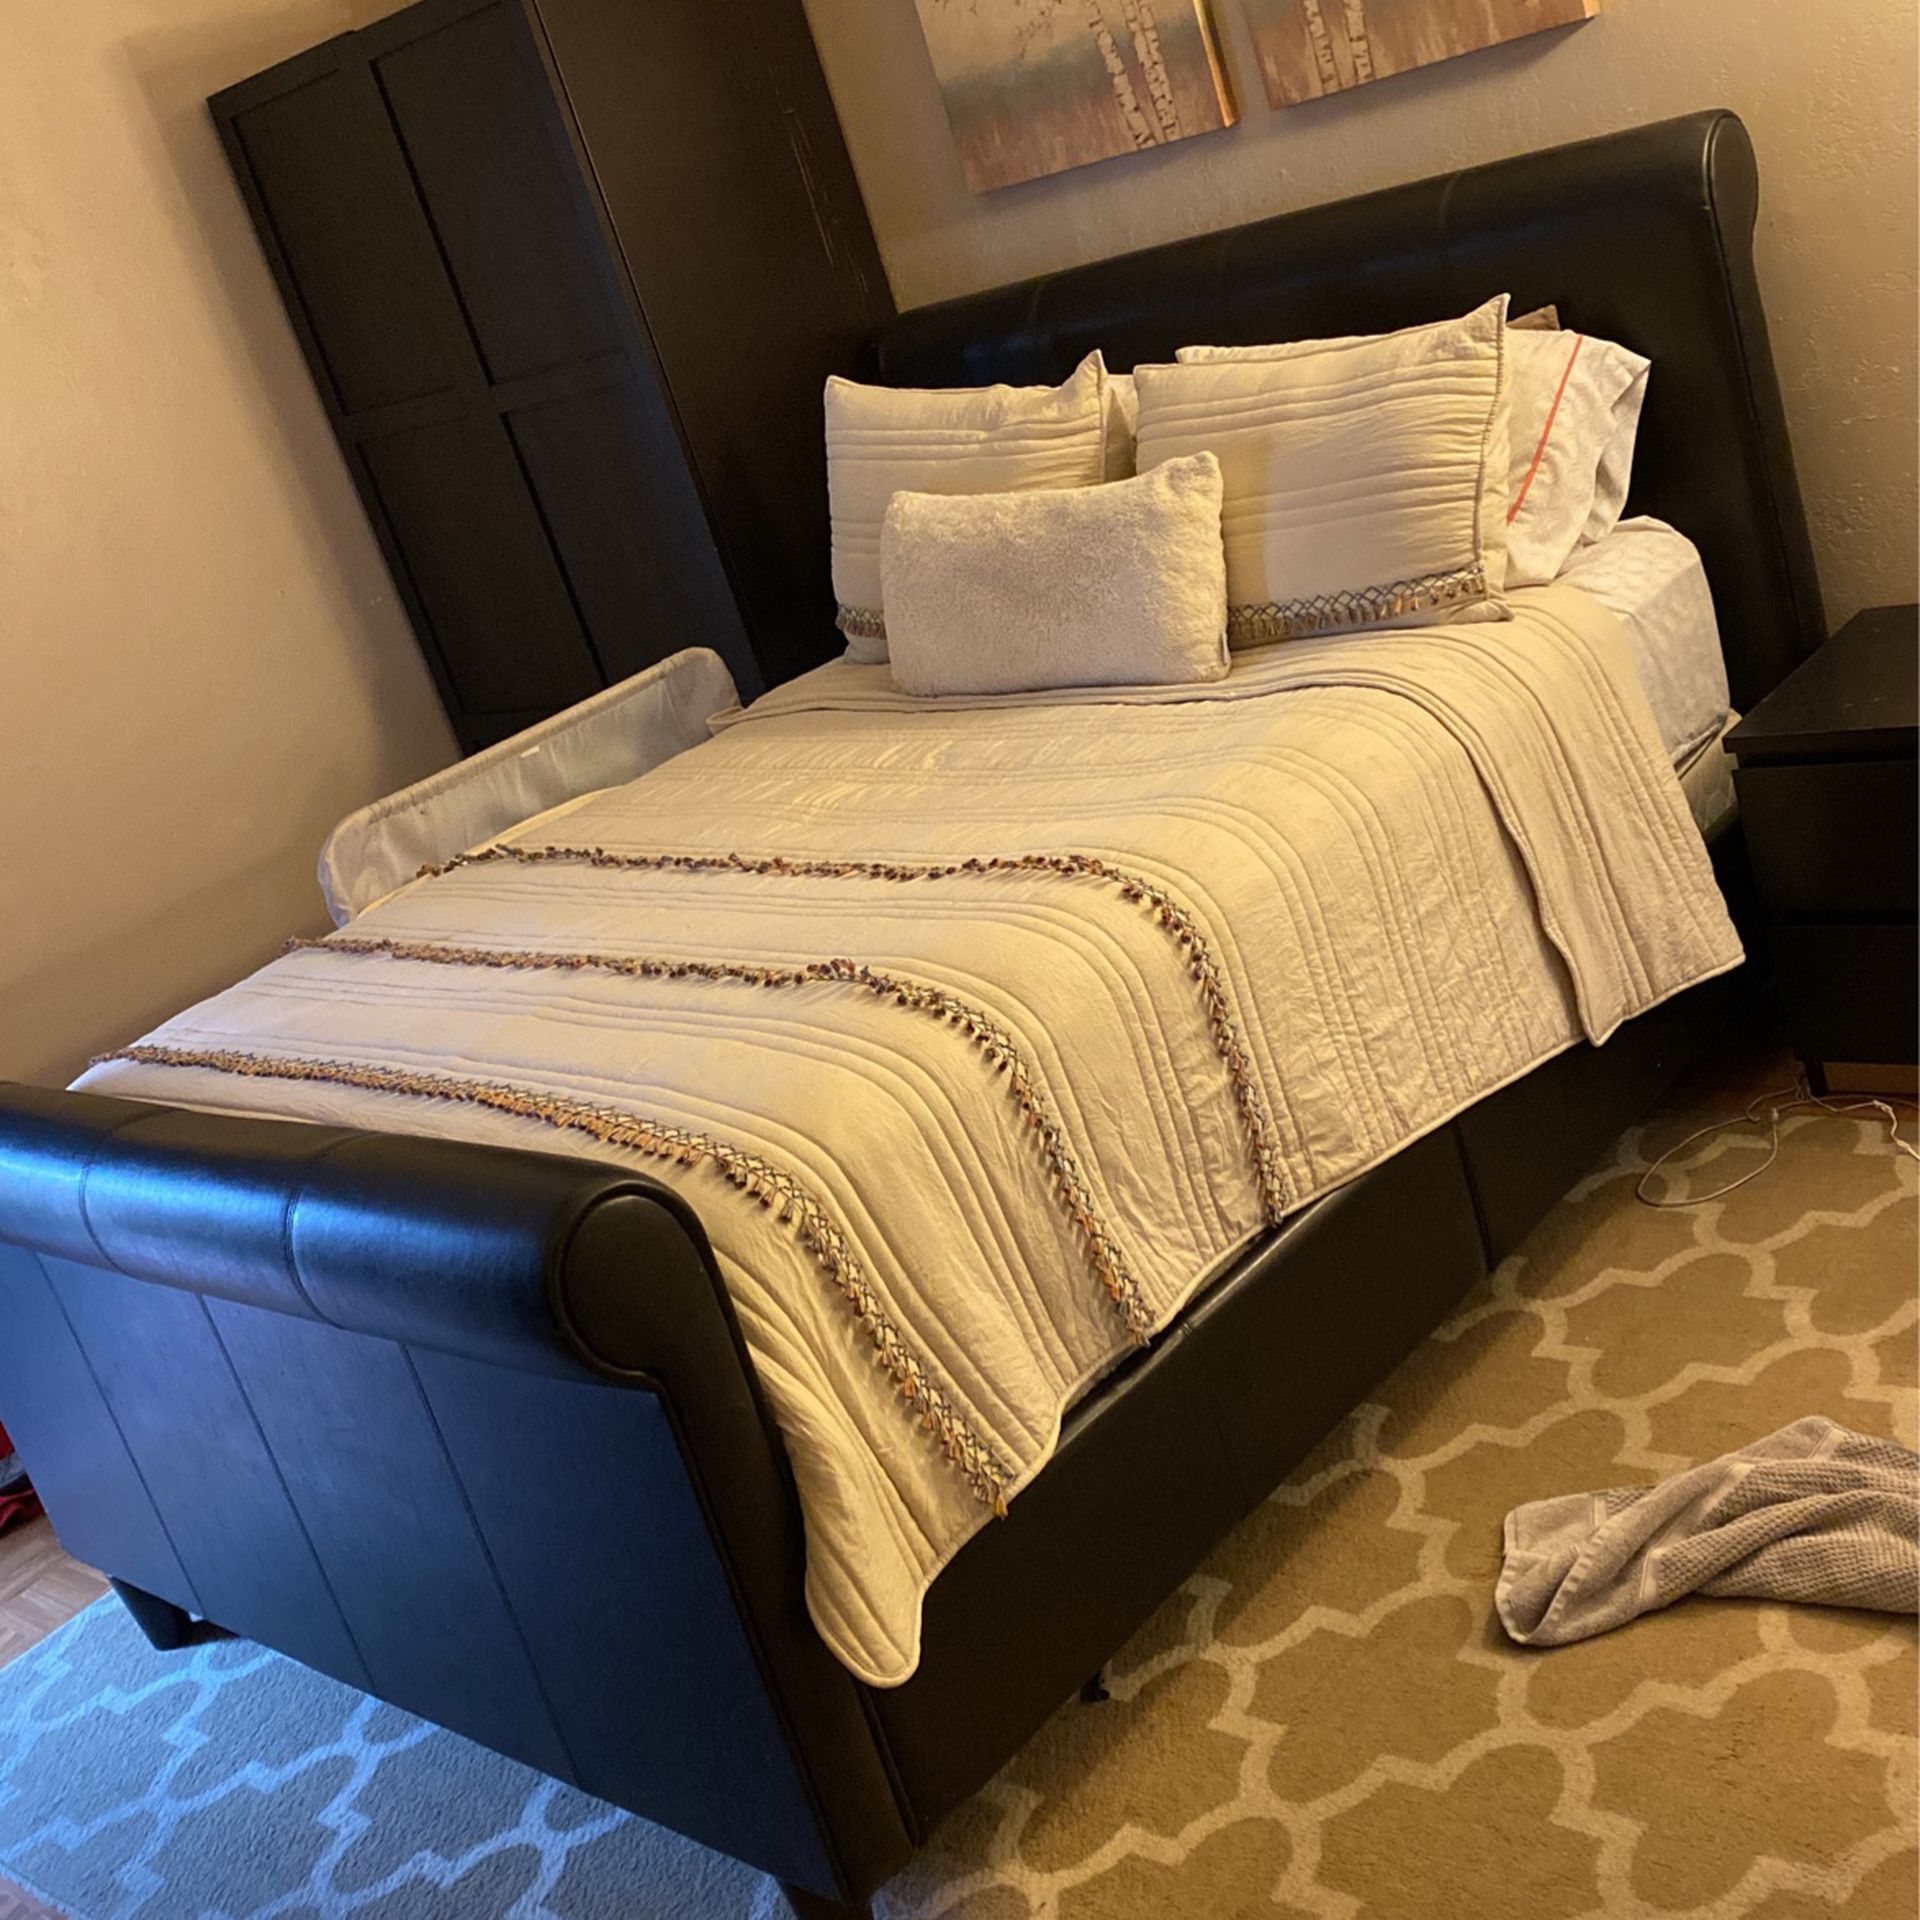 Queen bed frame and boxspring